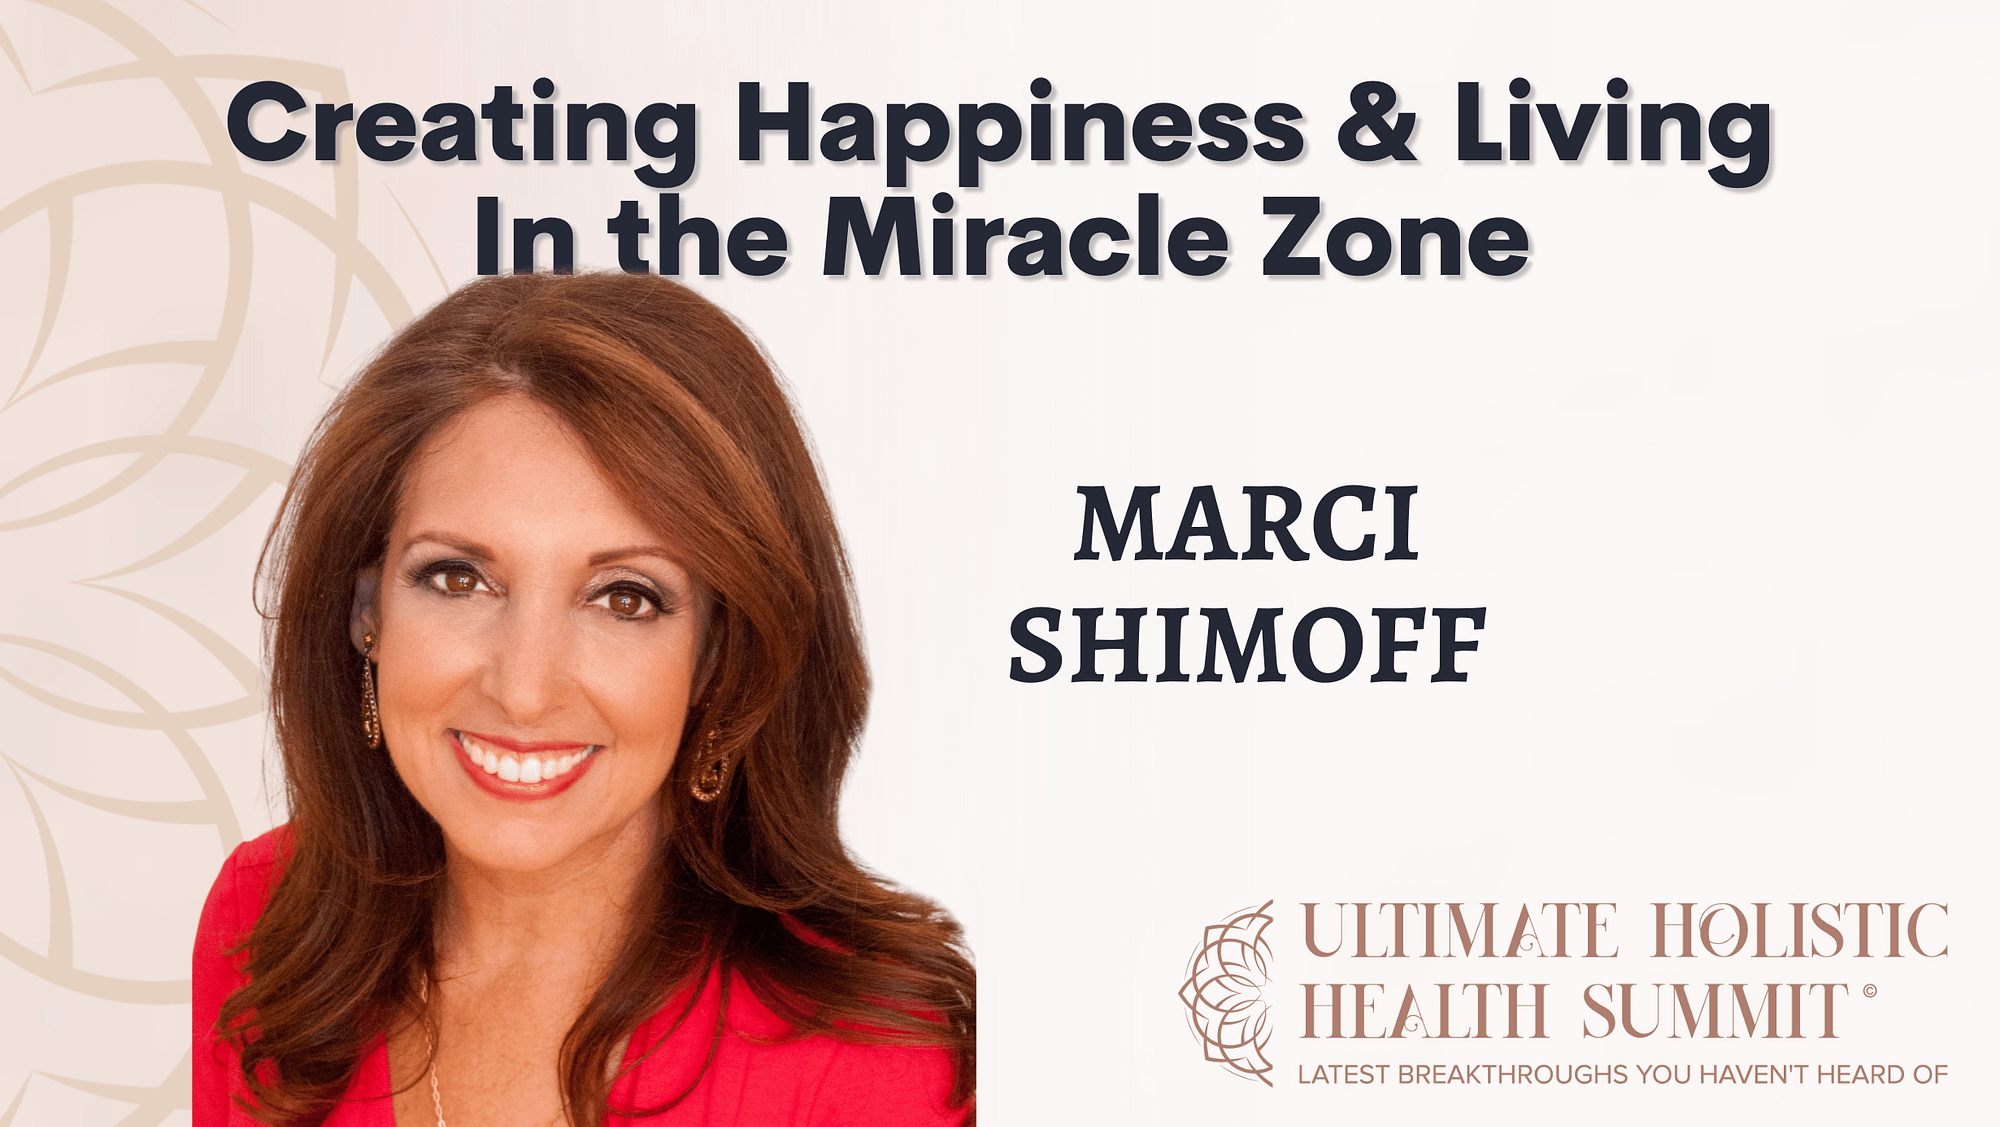 Creating Hapiness & Living in the Miracle Zone